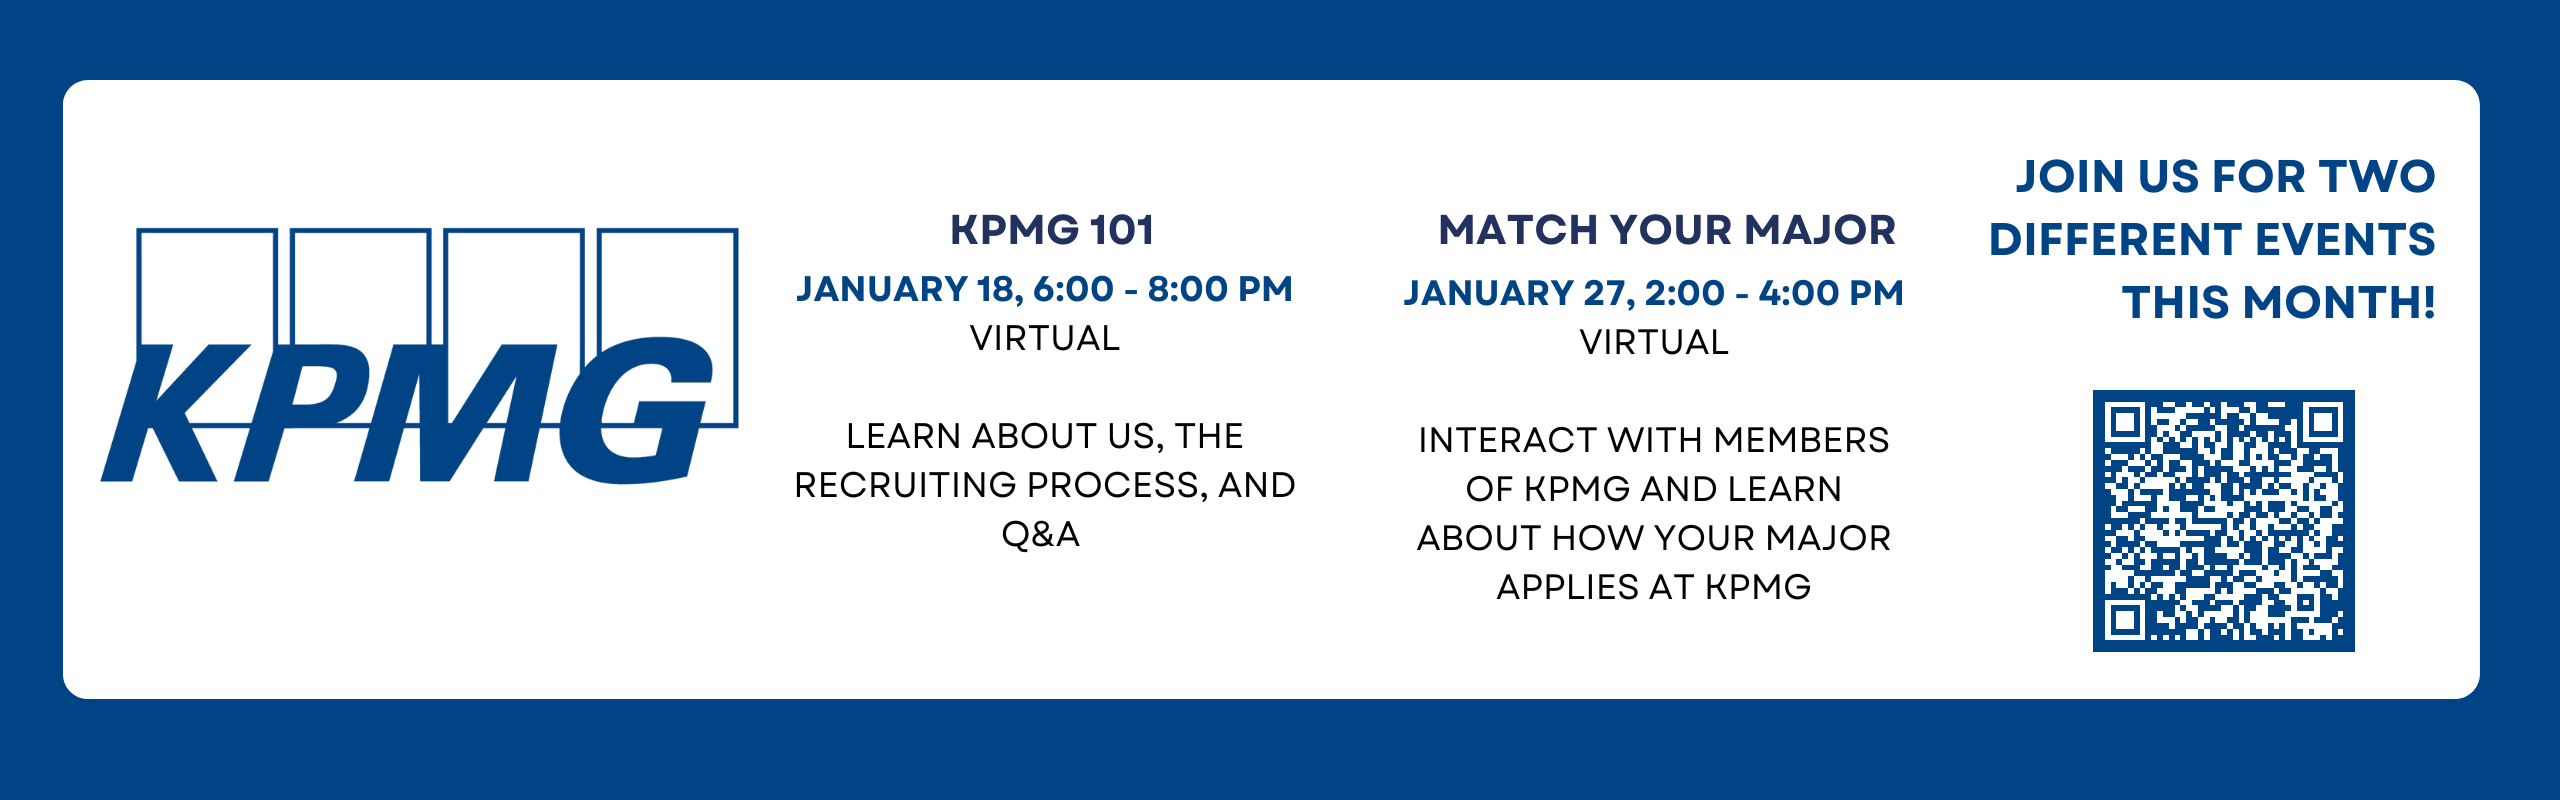 KPMG Match your Major event Jan 27t 2-4PM review EJN for more details